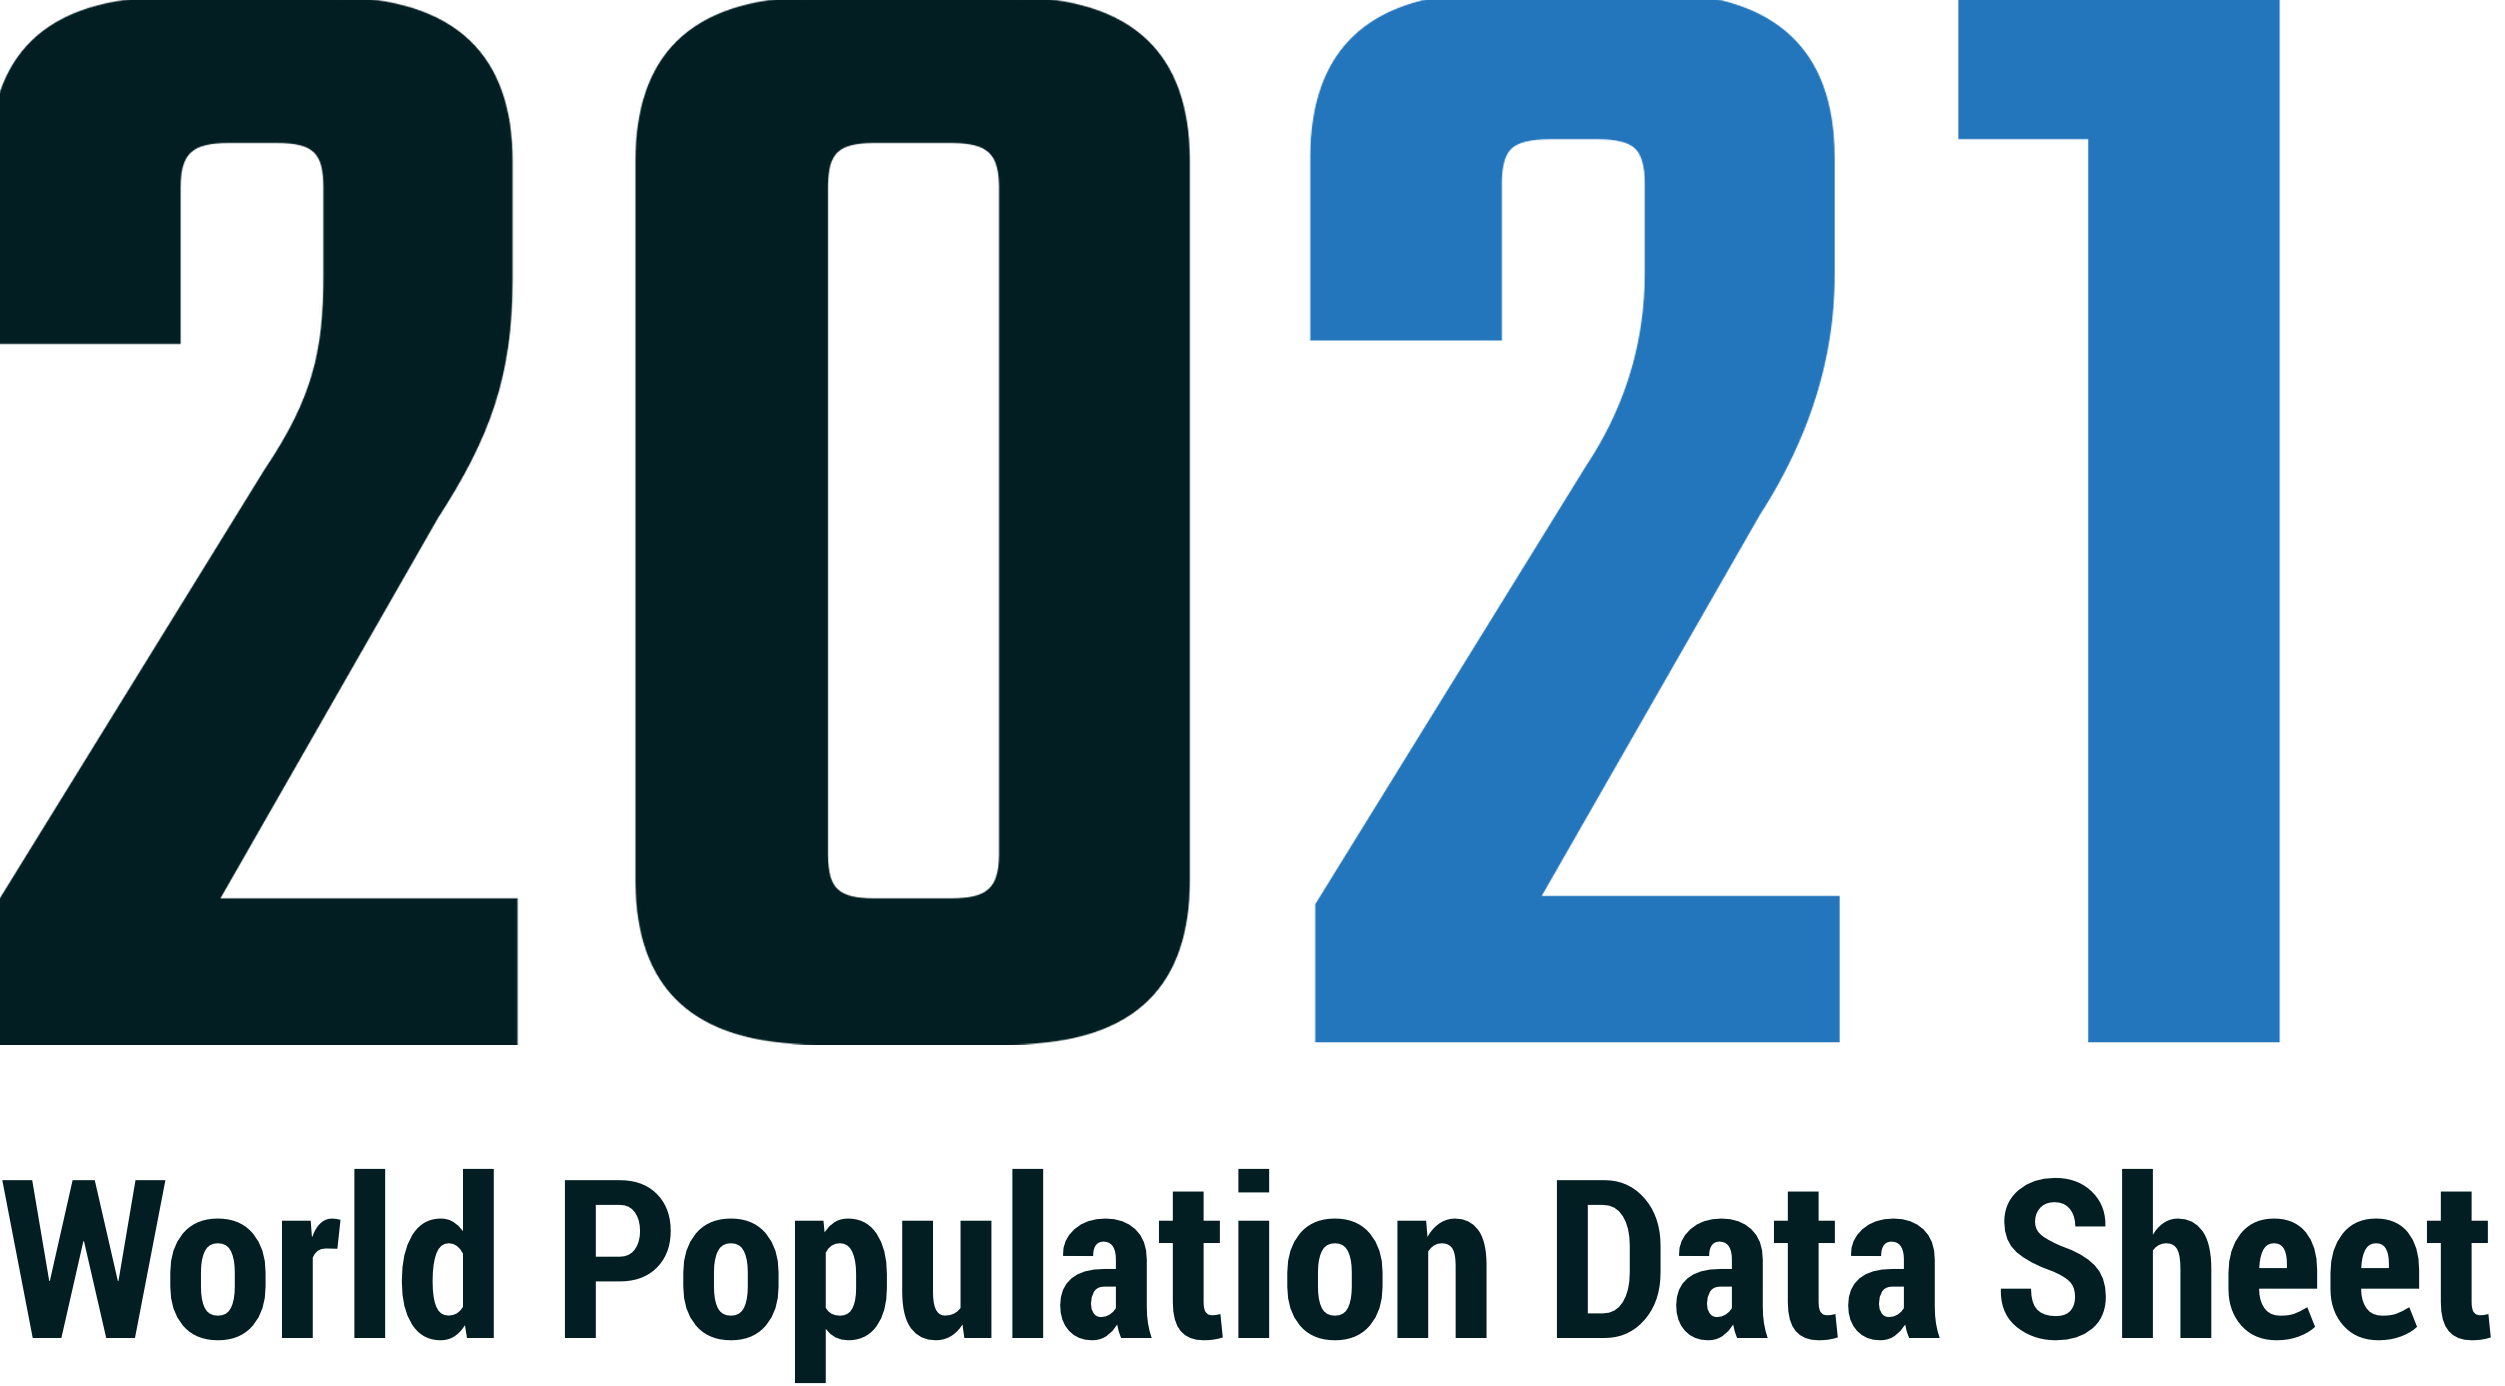 research reference population